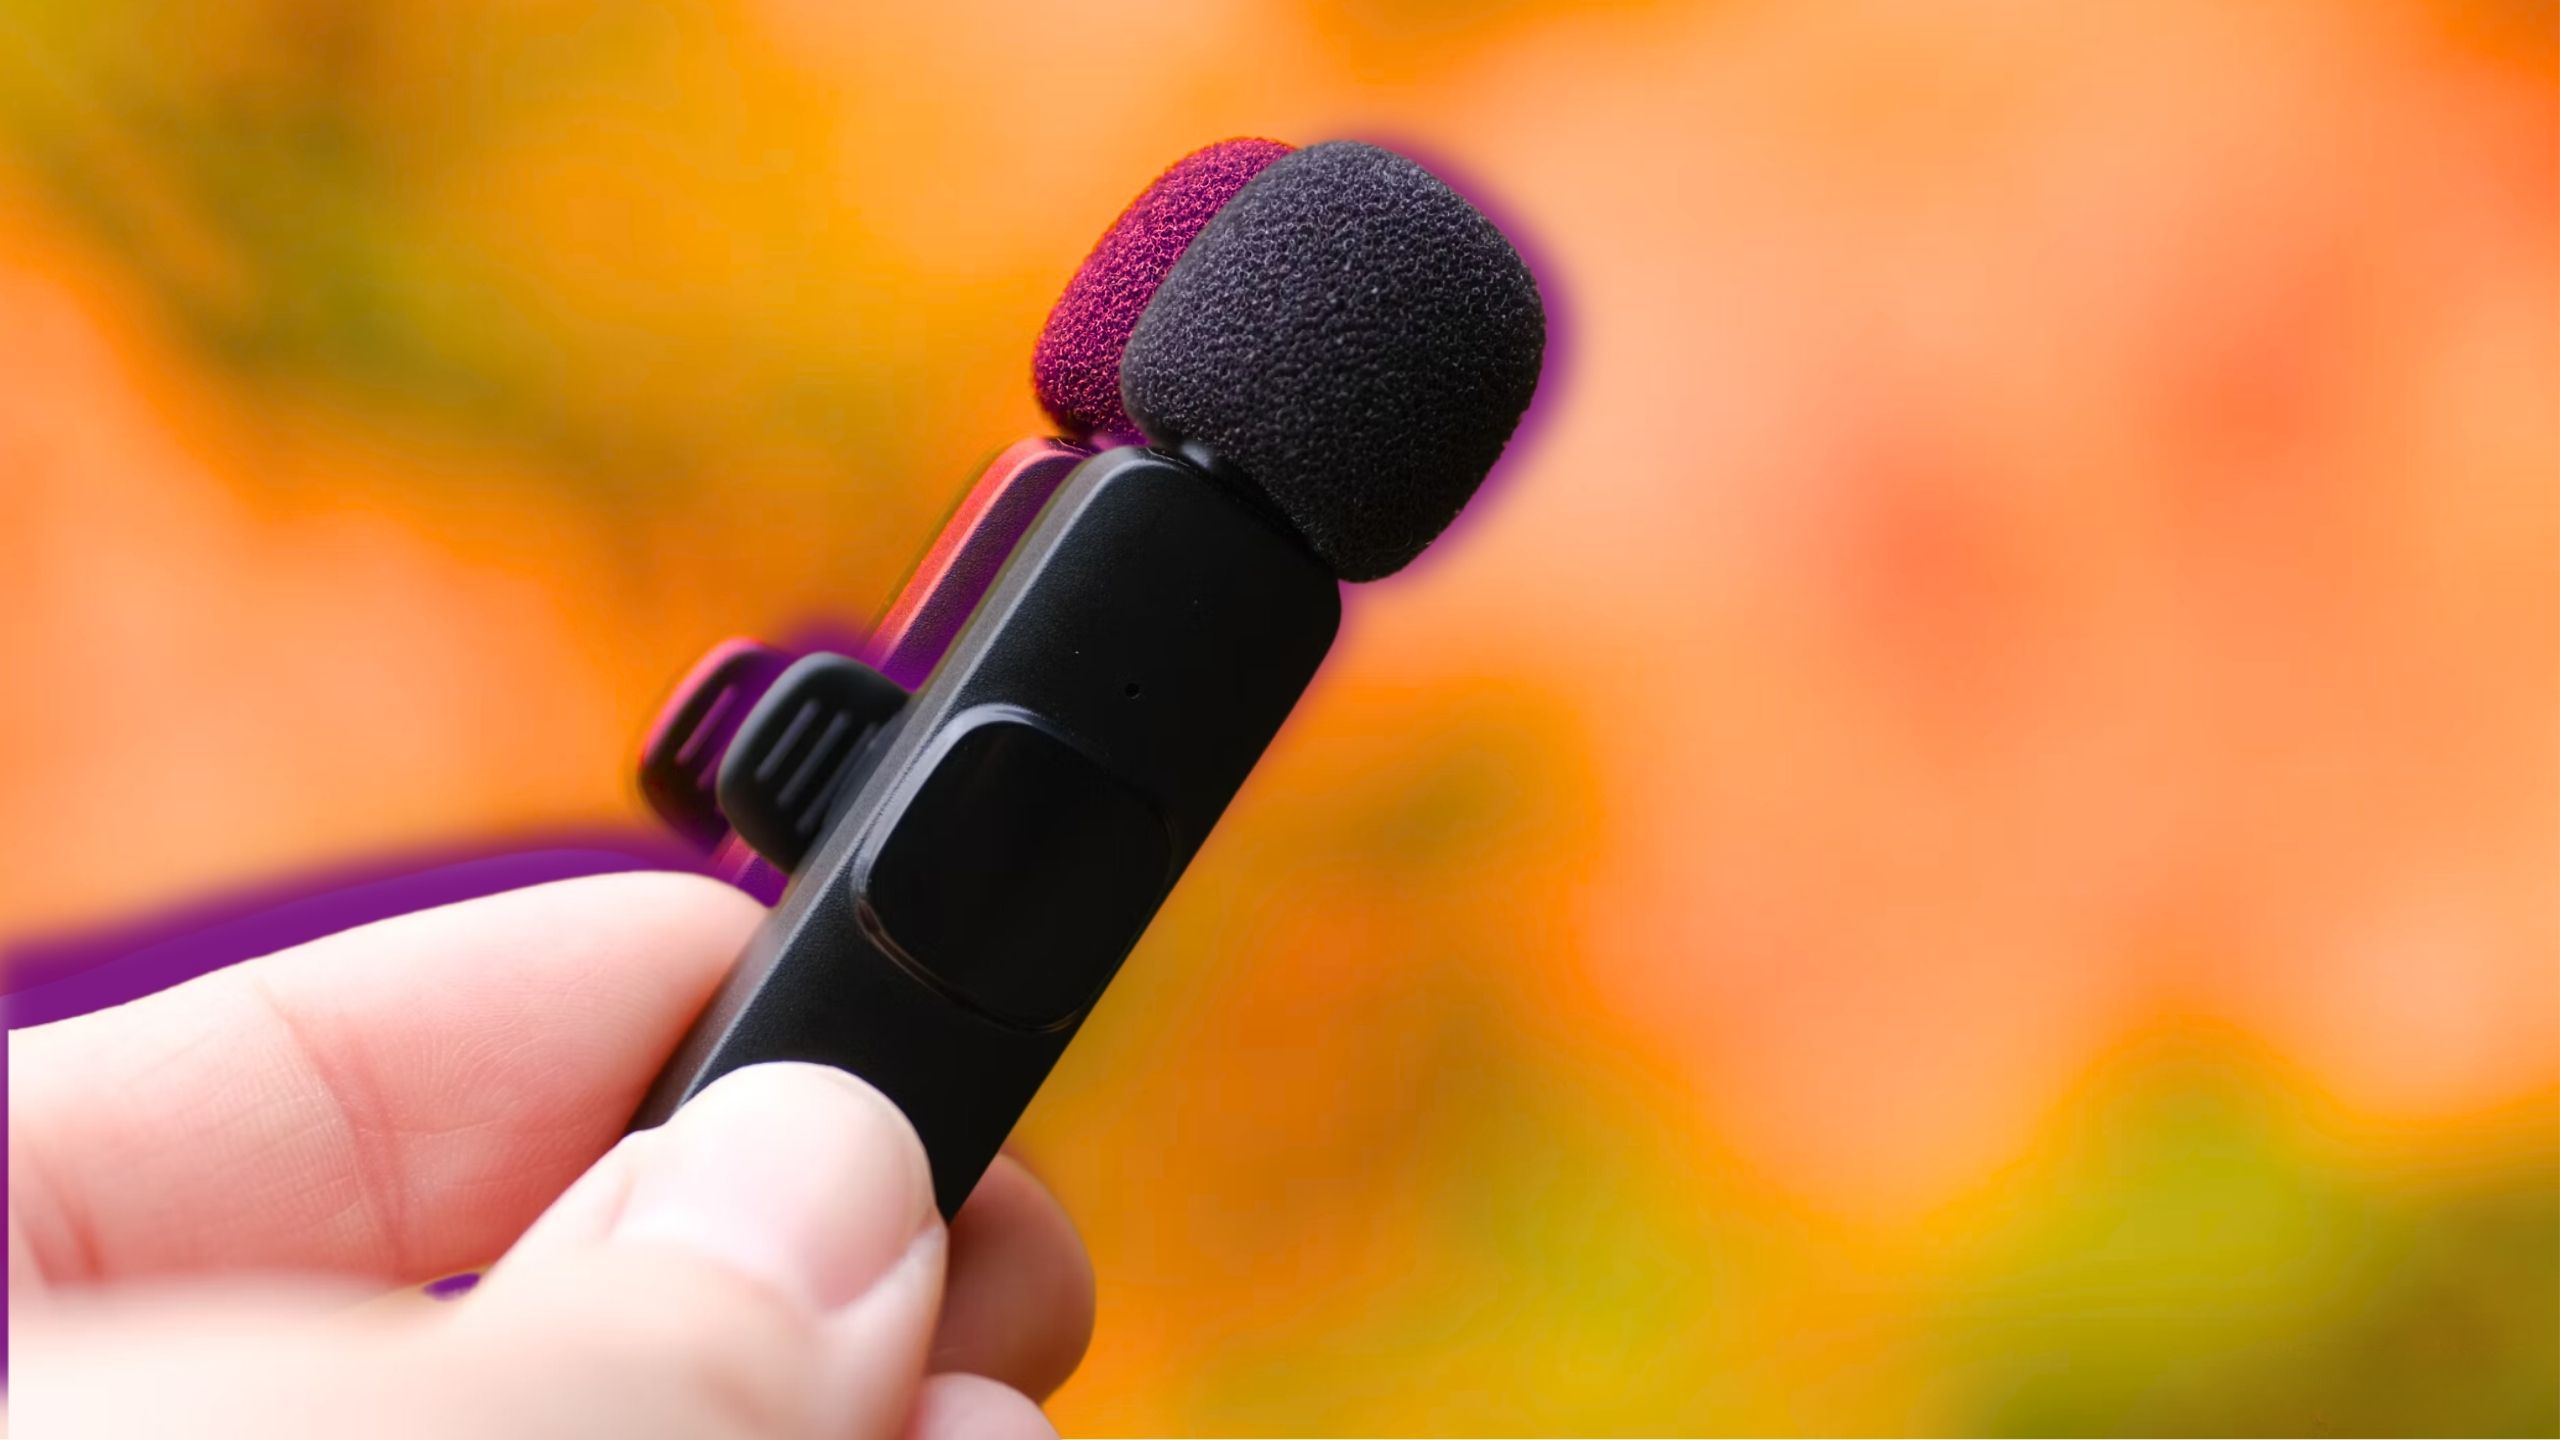 I found a $25 wireless iPhone microphone that’s surprisingly good